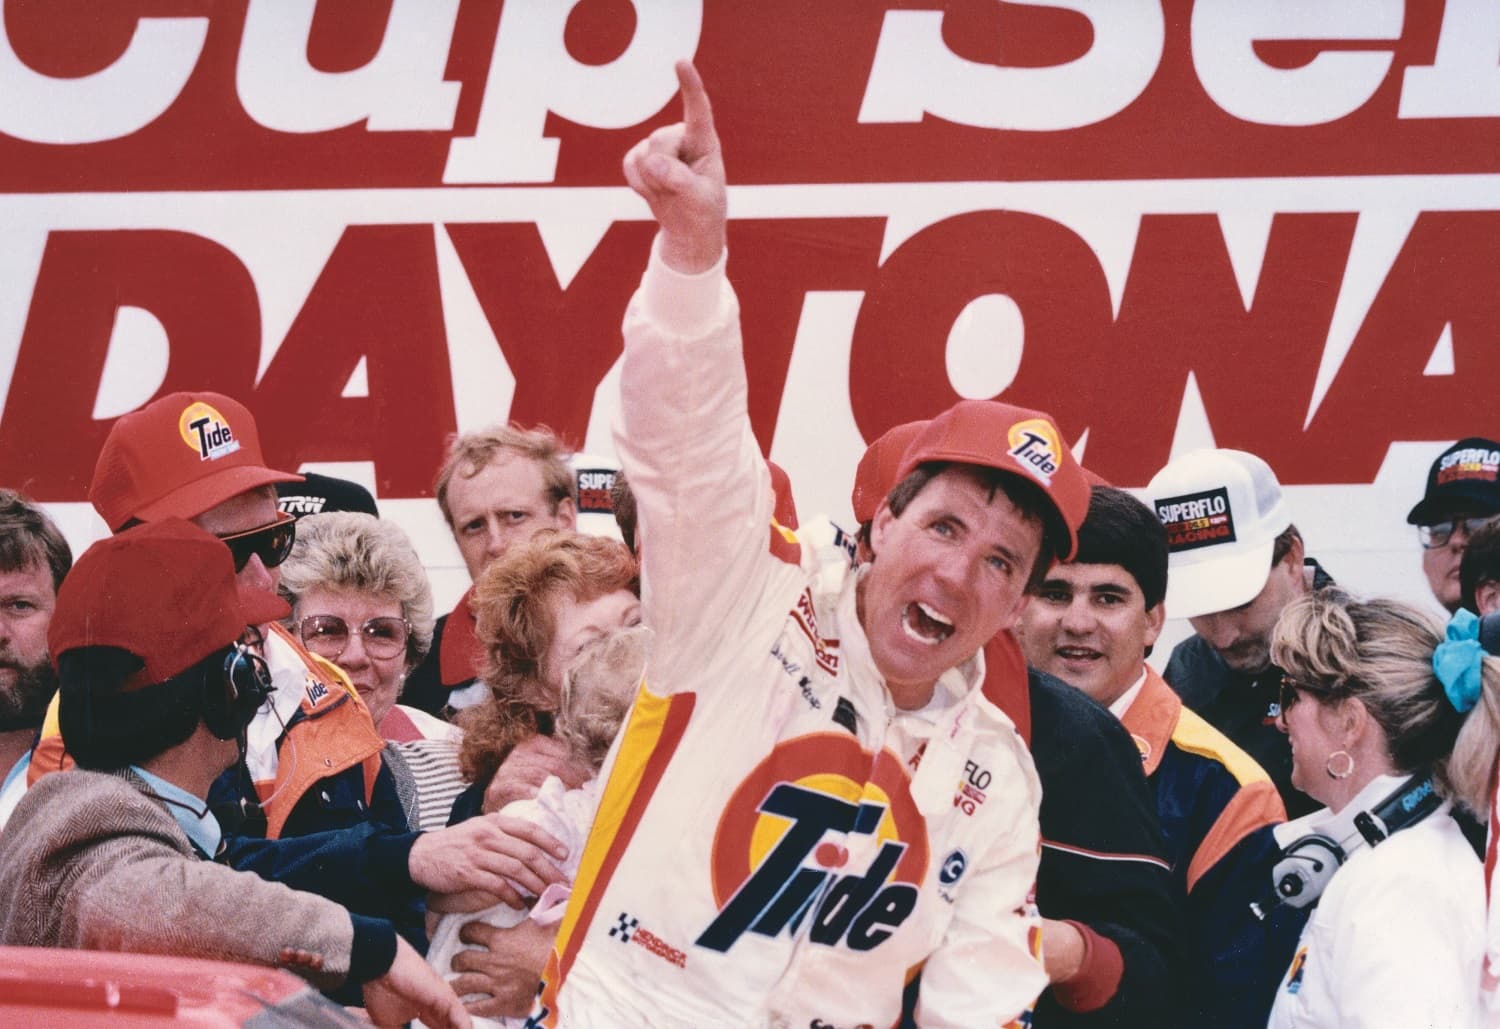 Darrell Waltrip celebrates in Victory Lane after winning the Daytona 500 on Feb. 19, 1989. | ISC Archives/CQ-Roll Call Group via Getty Images